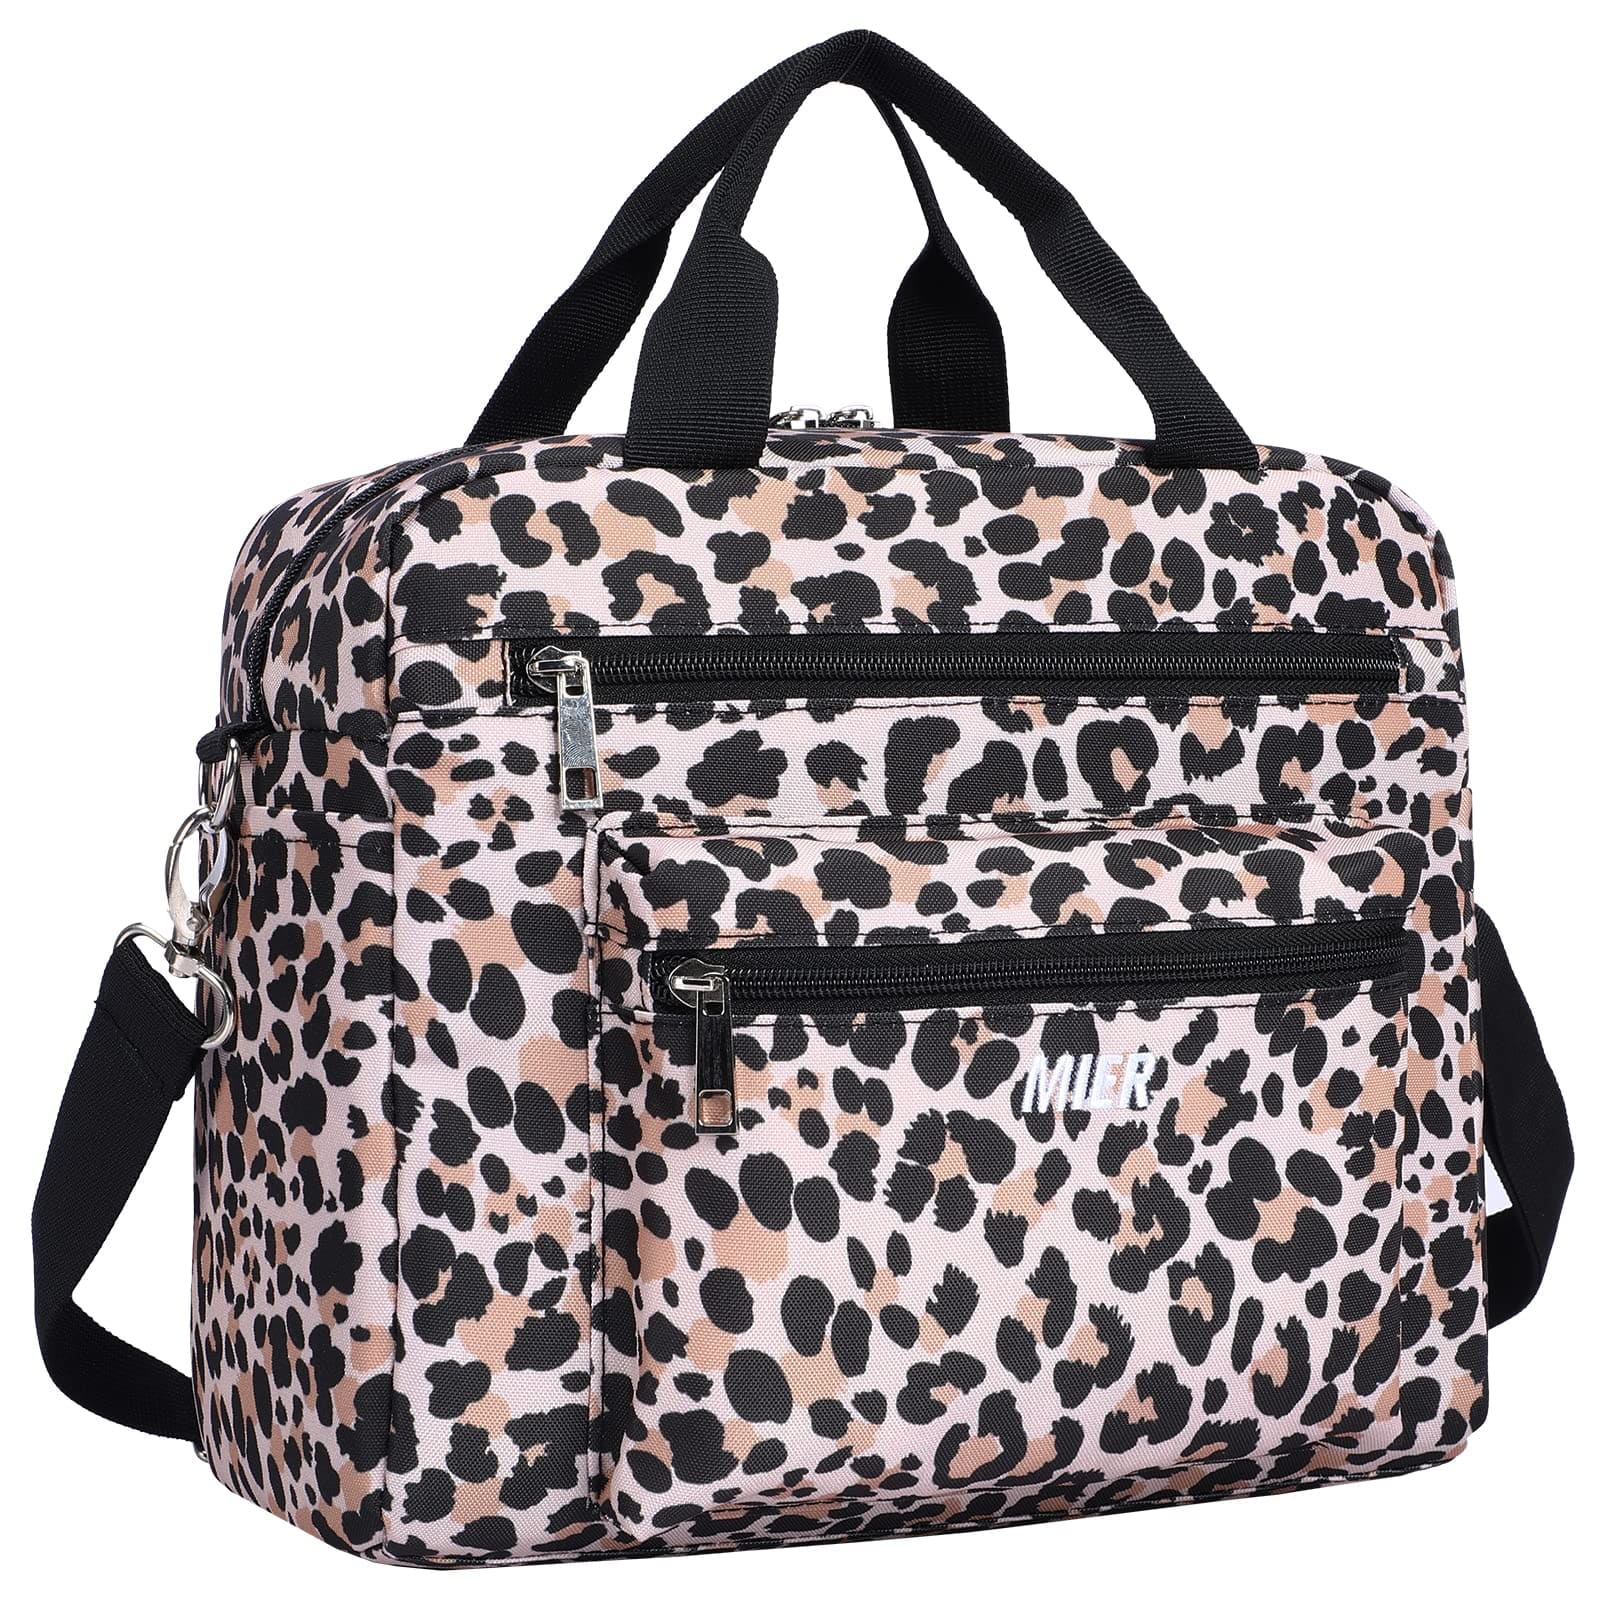 MIER Lunch Bag for Women Kids Stylish Insulated Lunch Box Fashion Adult Lunchbox Fashionable Lunch Bag Leopard MIER